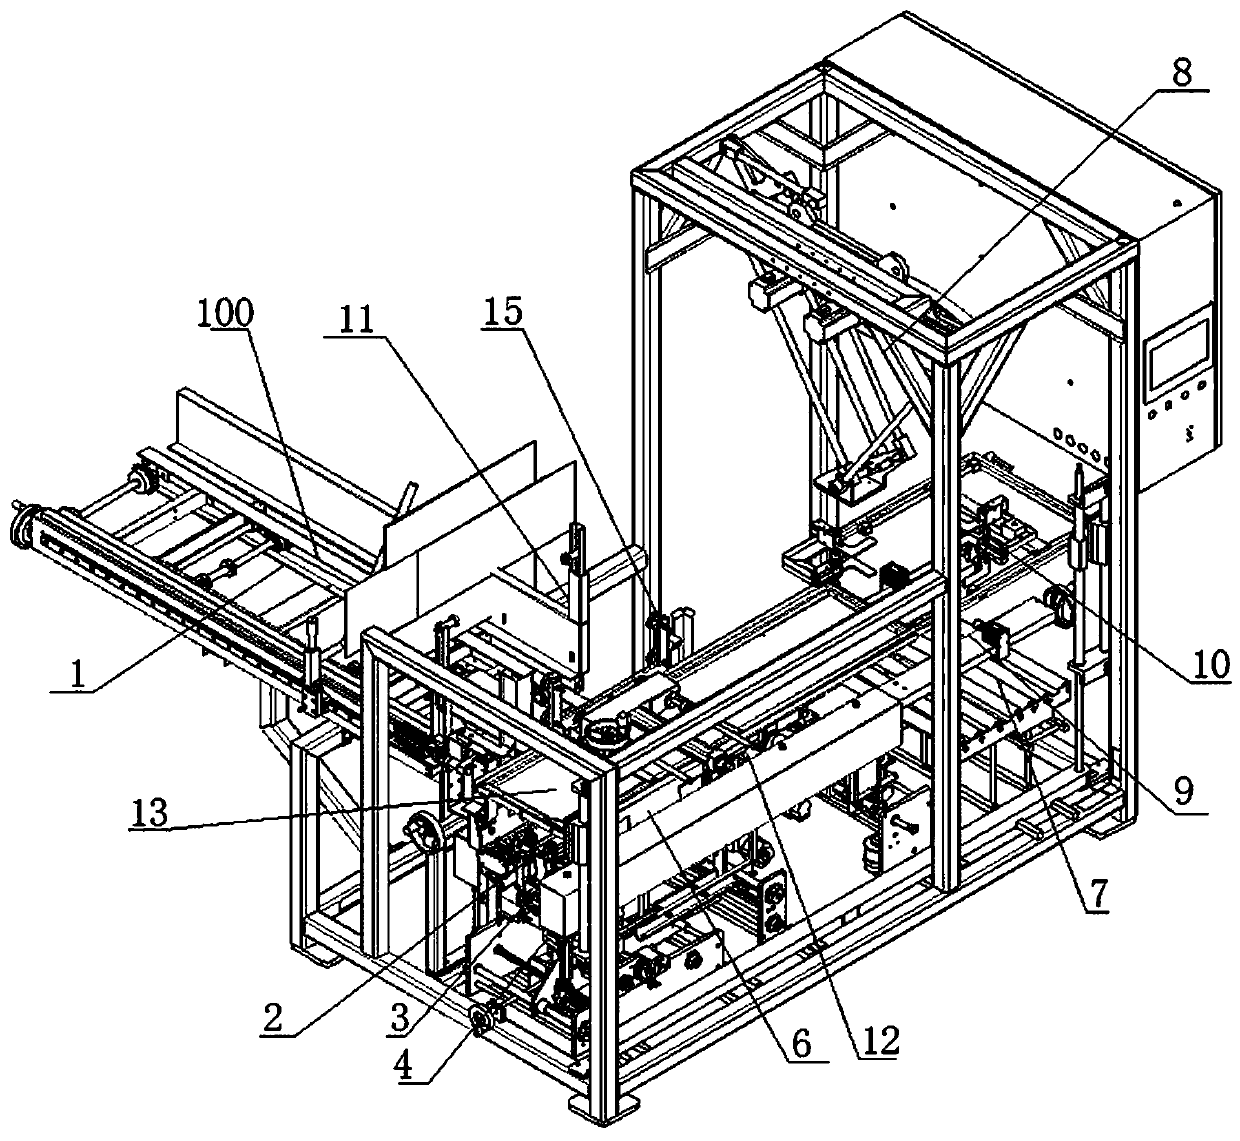 A packing machine for vertical packing